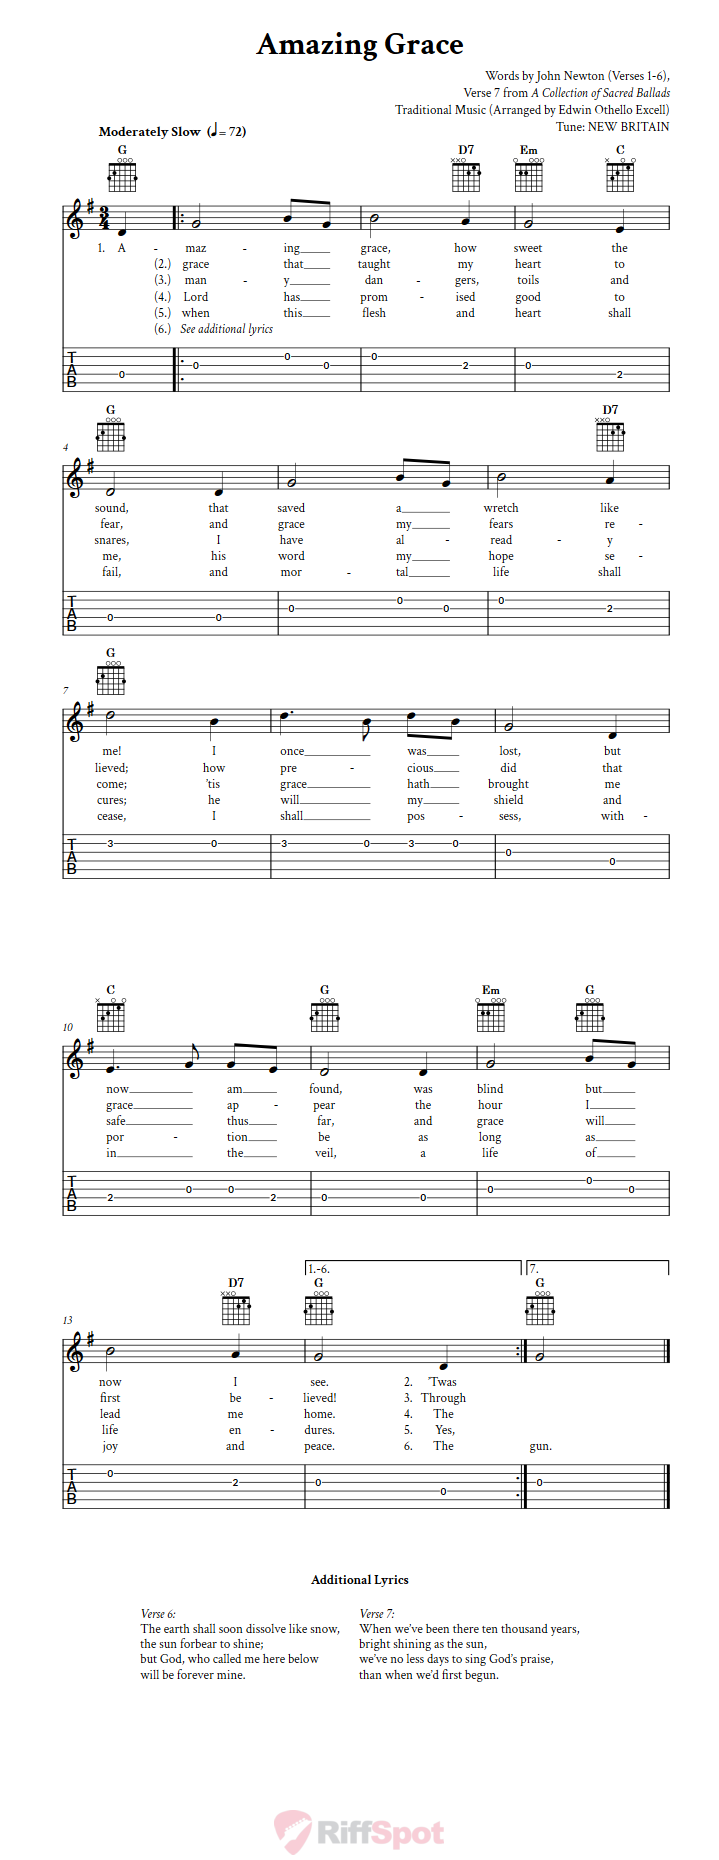 Amazing Grace Chords Sheet Music And Tab For Guitar With Lyrics